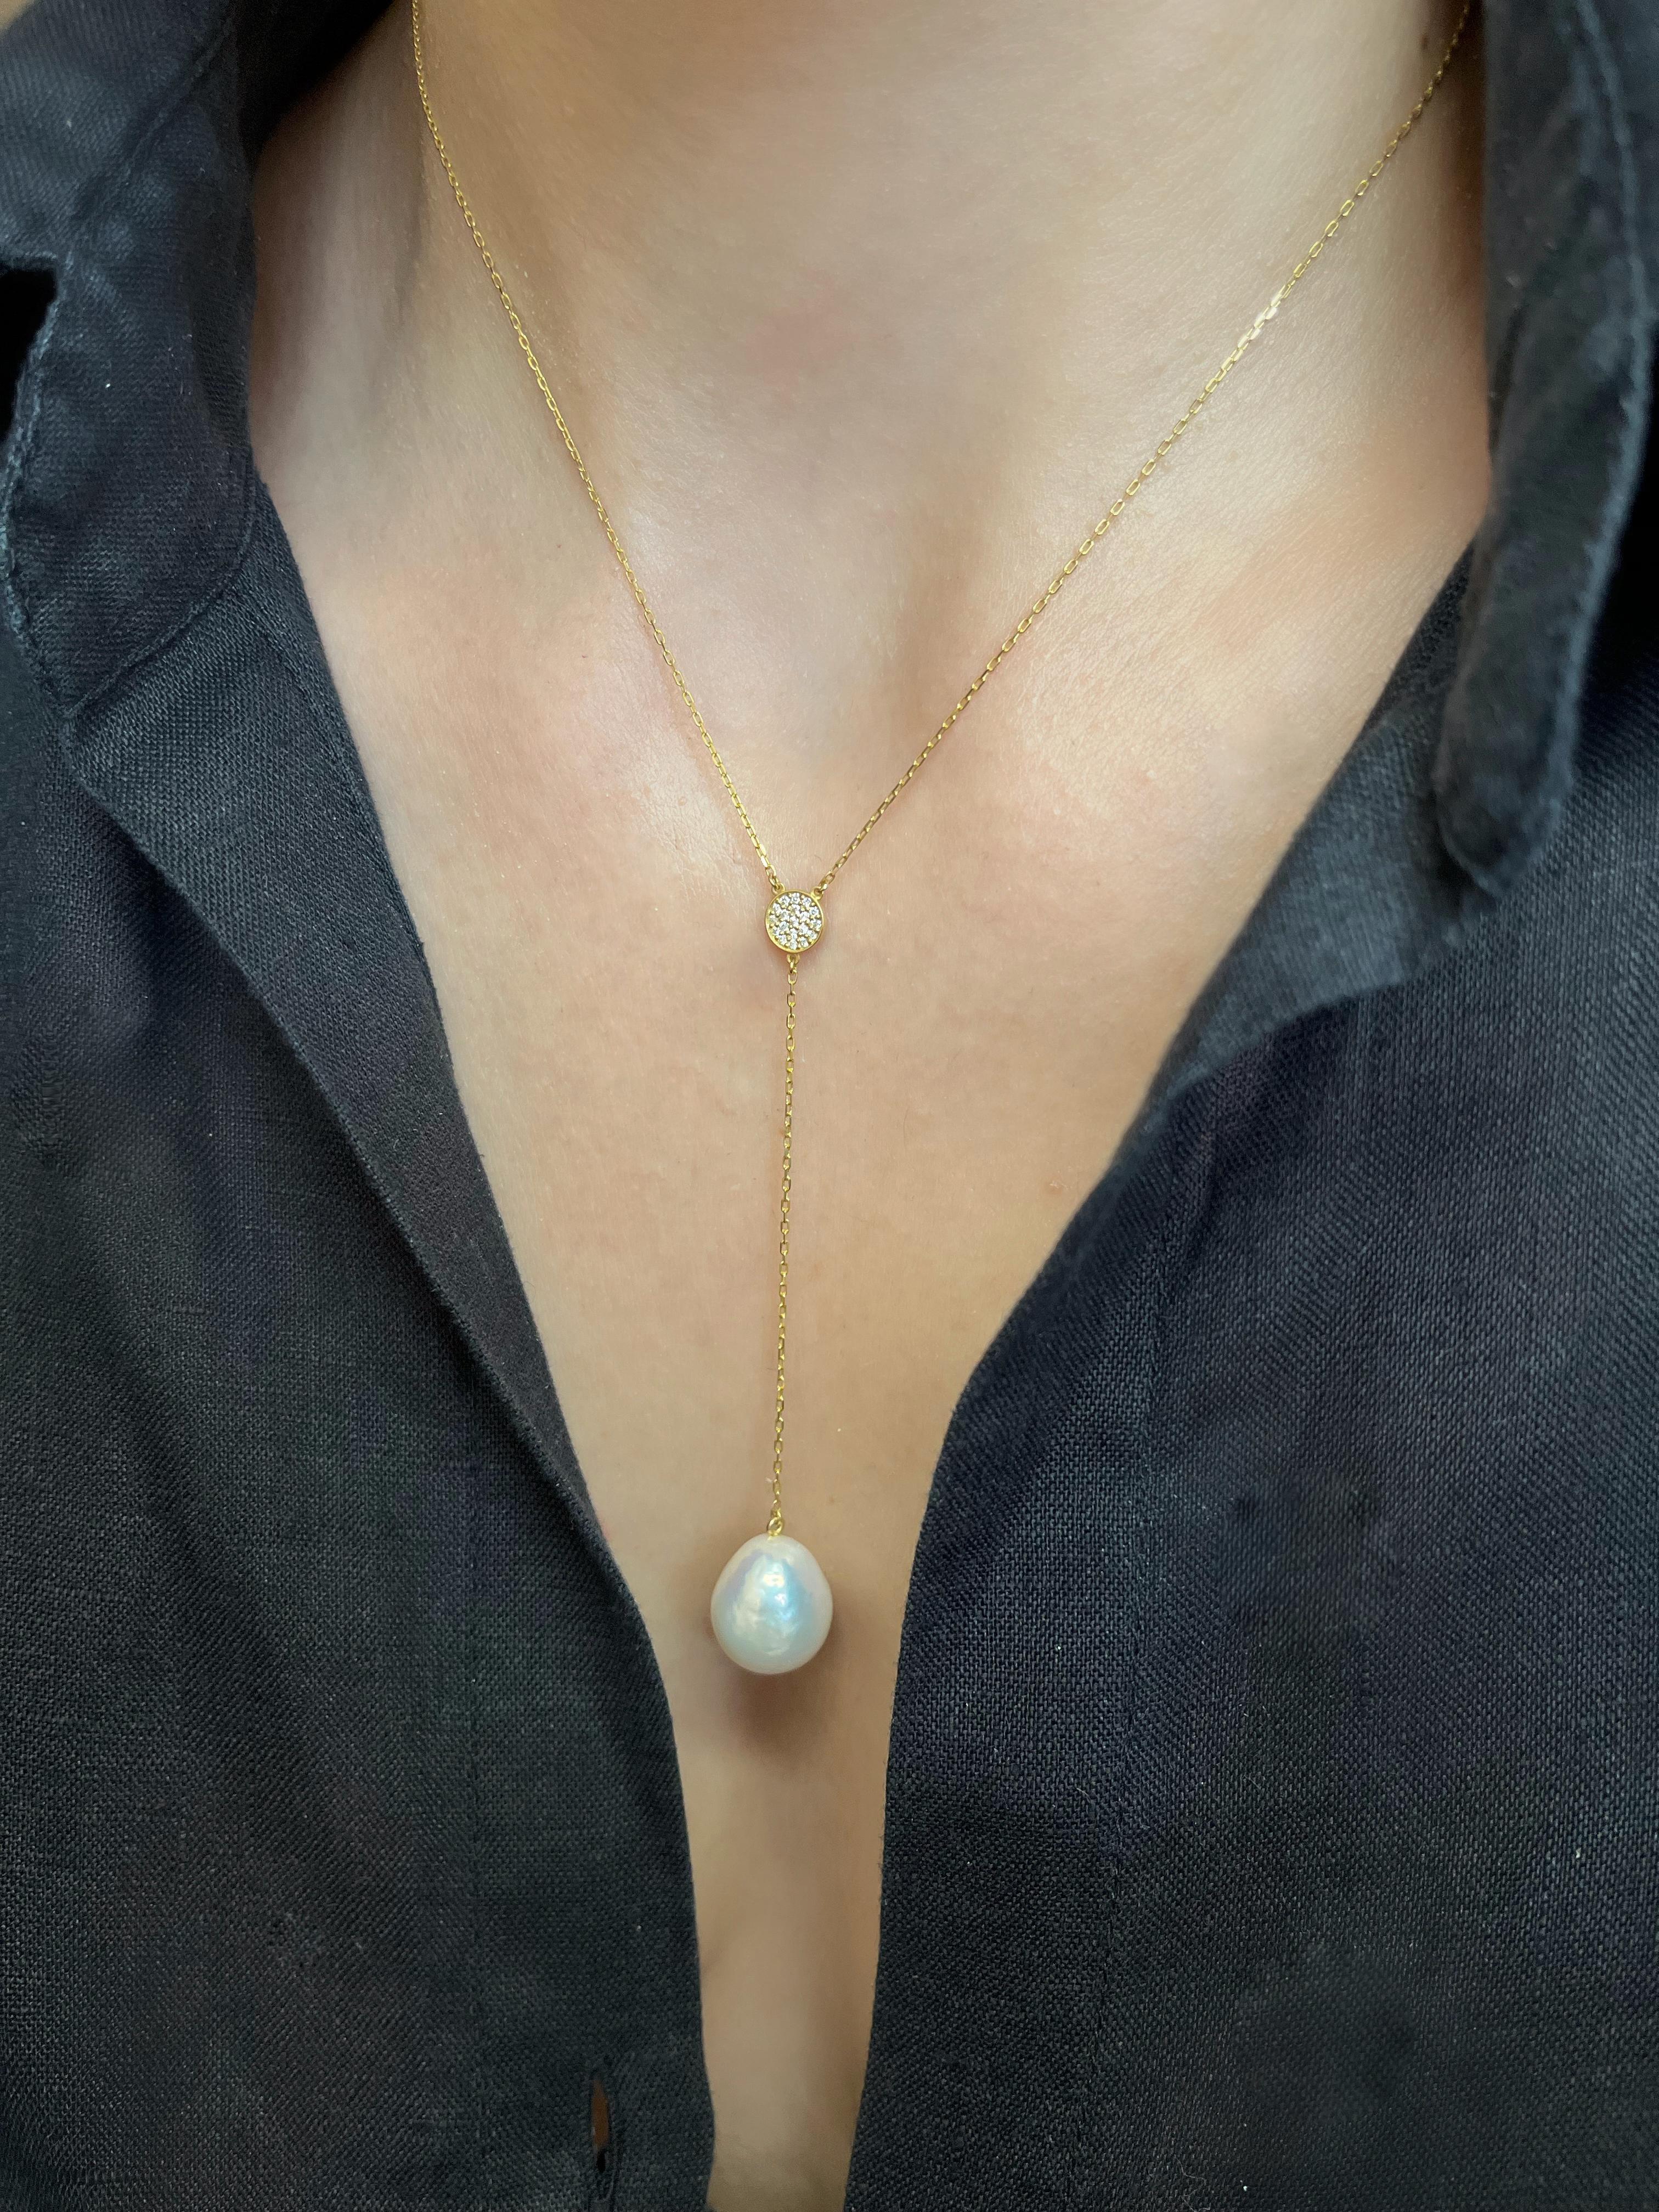 Our lariat necklace features a baroque drop shaped pearl suspended from a sparkly chain and accentuated by a yellow gold disk set with glimmering diamonds.

 The simplicity in its silhouette combined with the high-quality materials used, make this